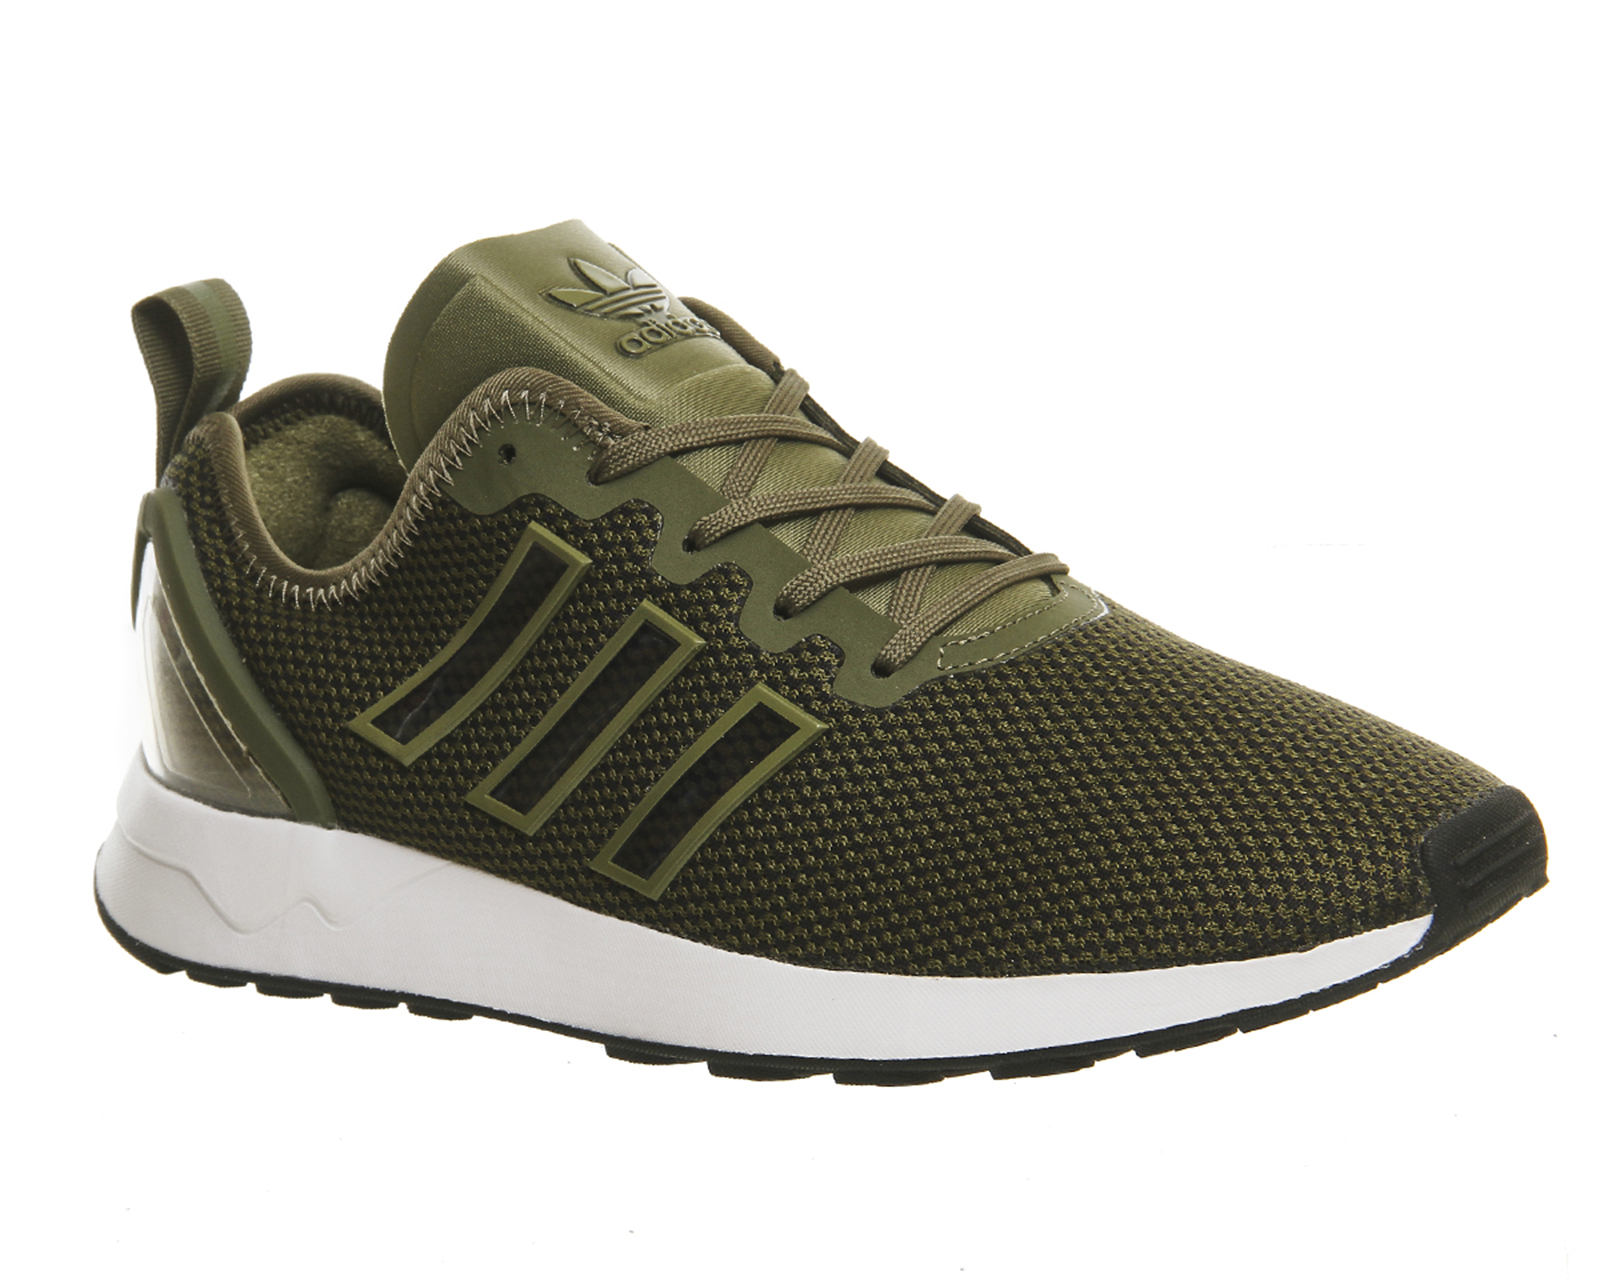 adidas zx flux olive